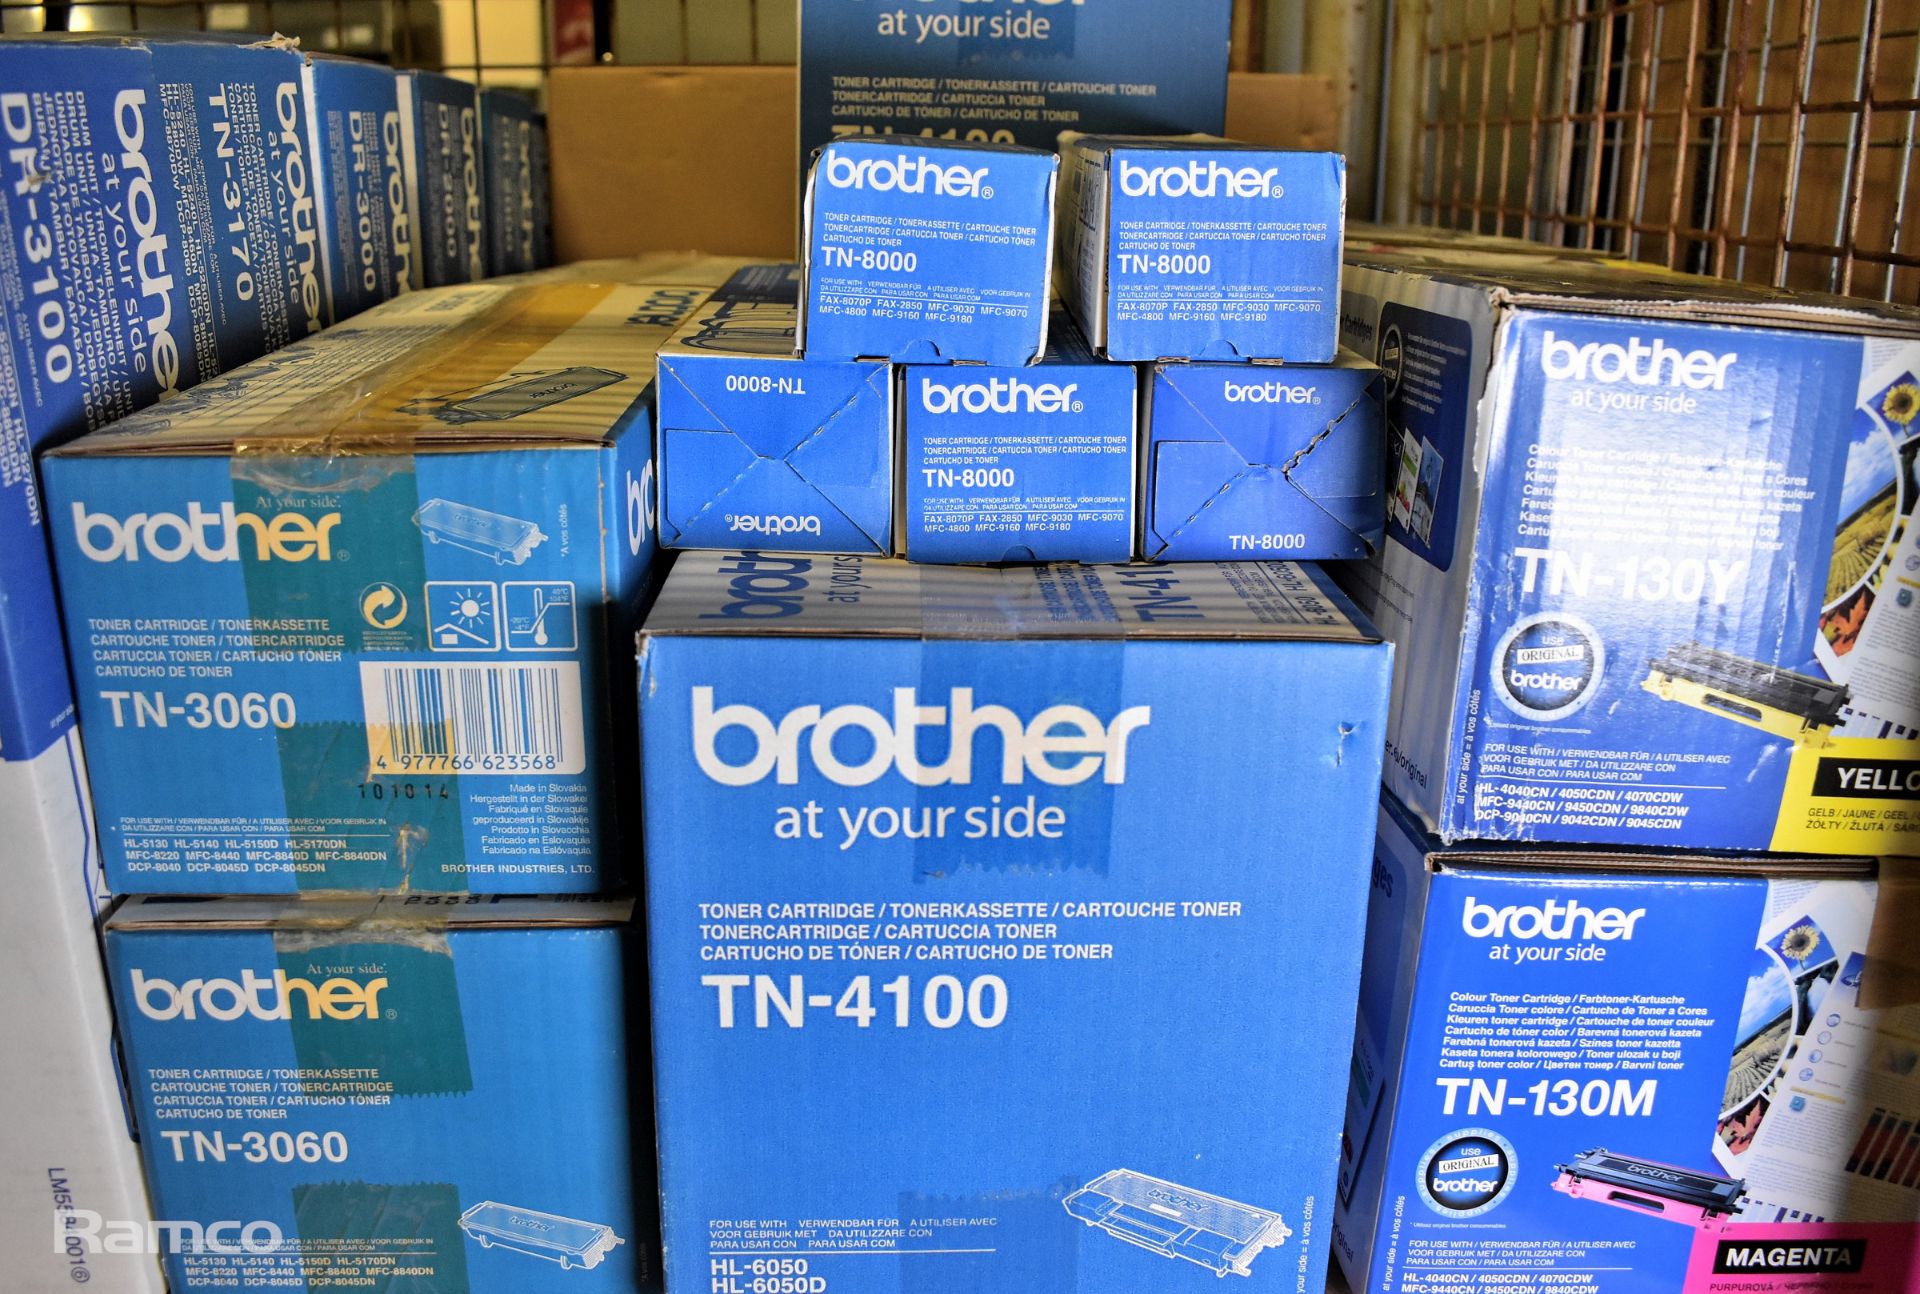 Multiple Brother printer accessories, toner cartridges, drum units - 36 in total - see pictures - Image 7 of 7